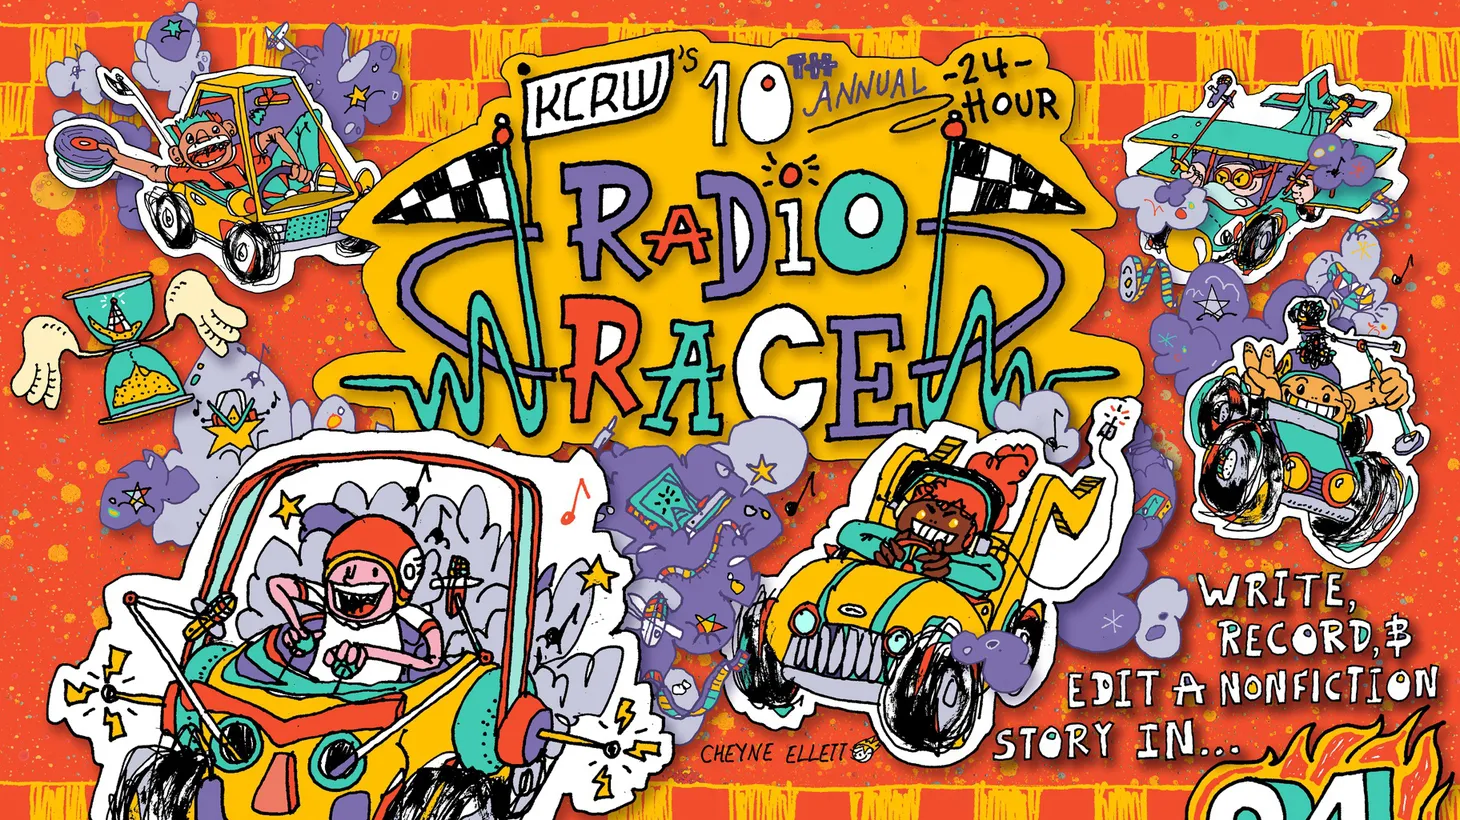 “Can you Keep My Secret?” was the theme for this year’s KCRW Radio Race.